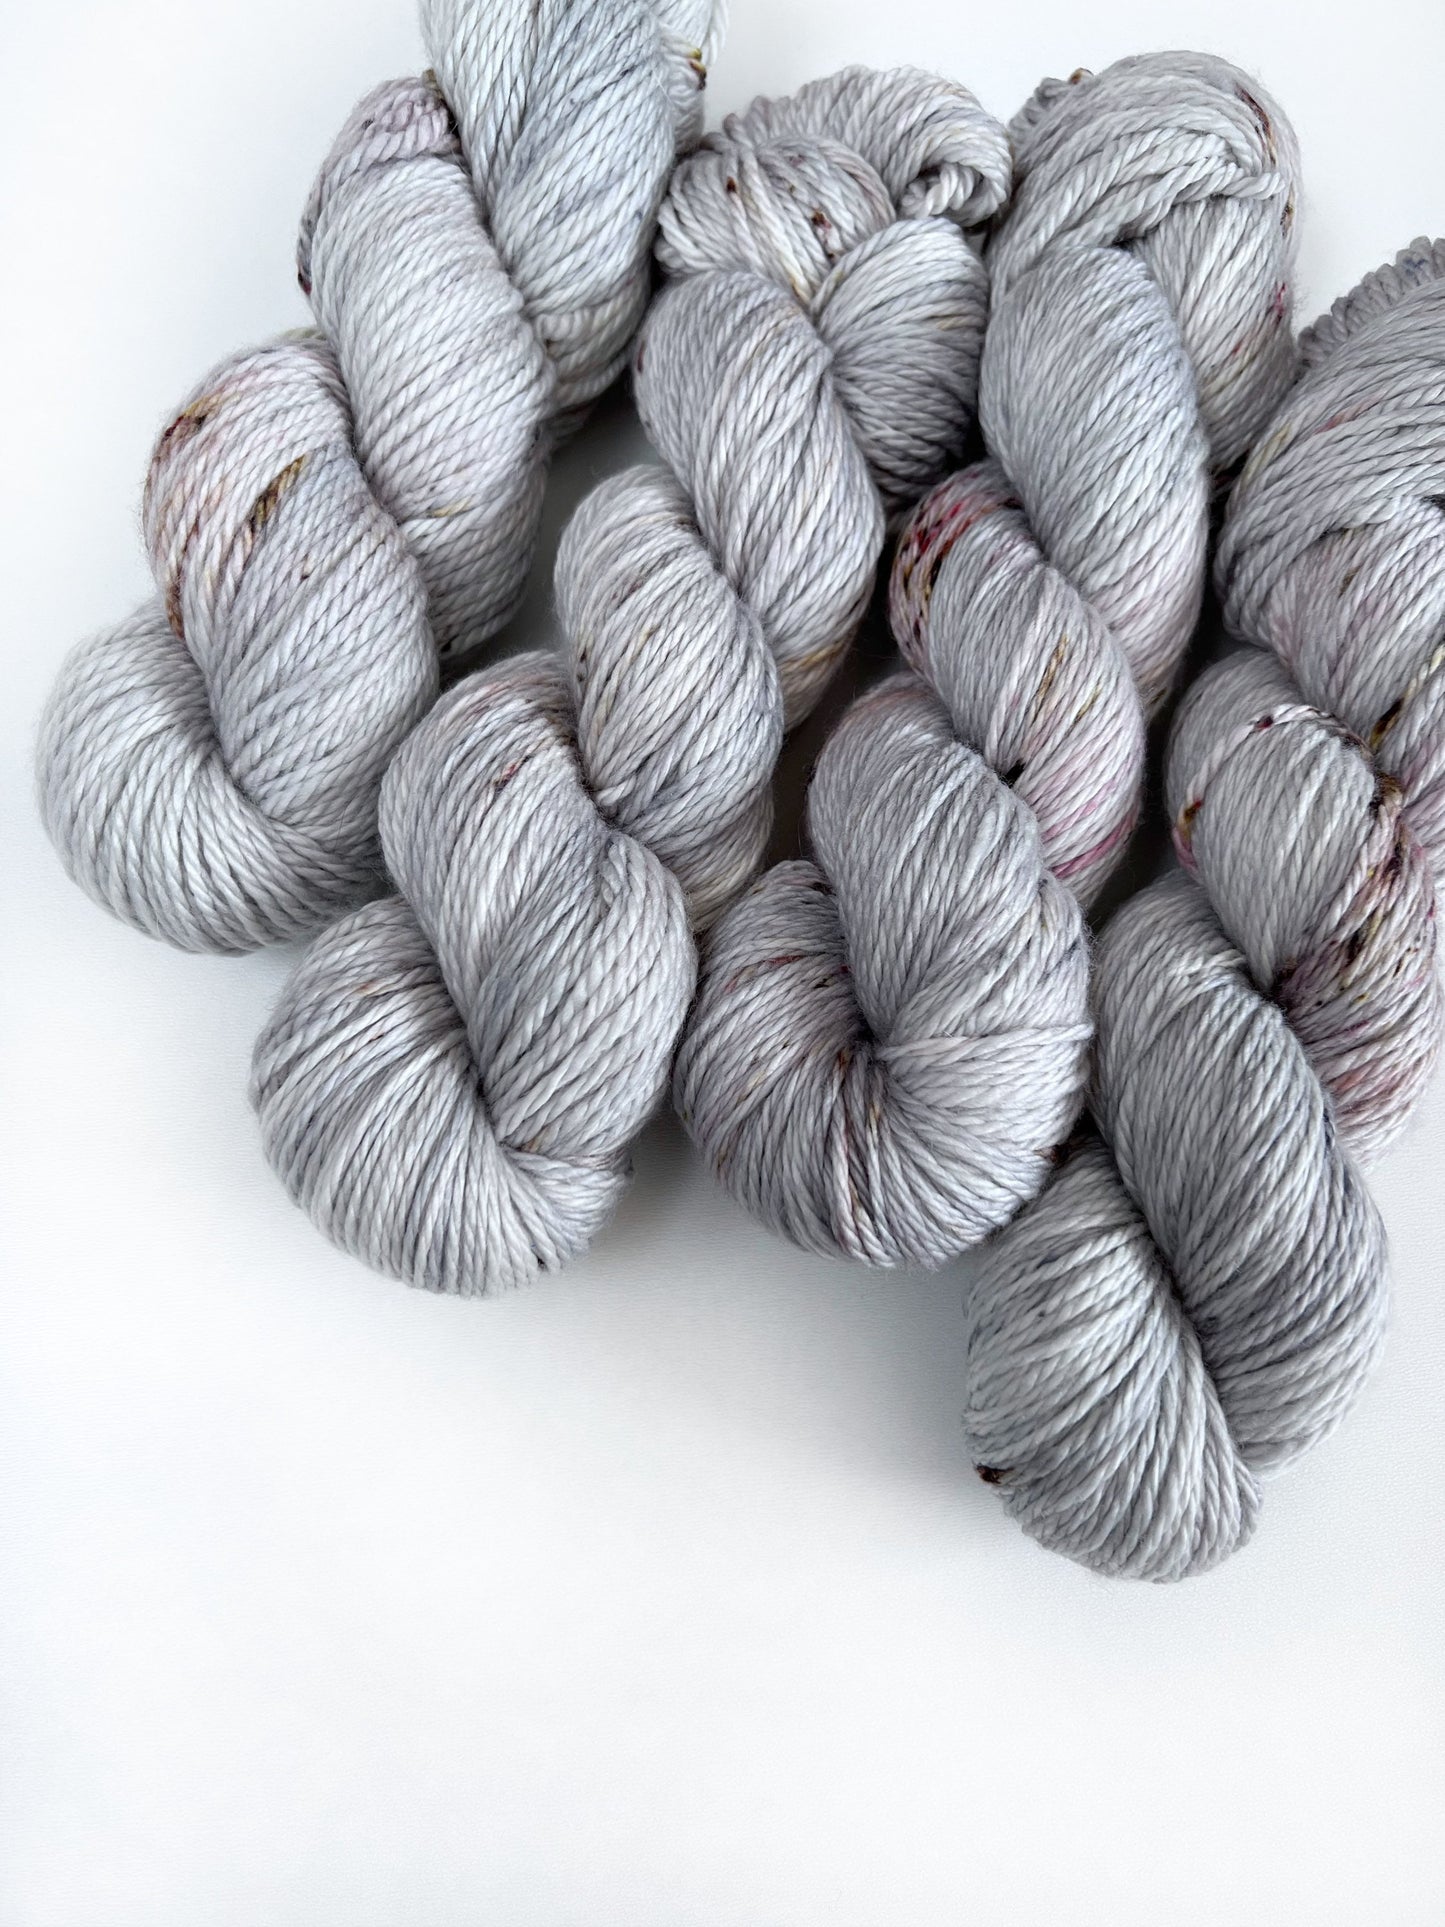 LAND OF THE SILVER BIRCH - Grey Brown Red Blue Speckled Neutral Worsted